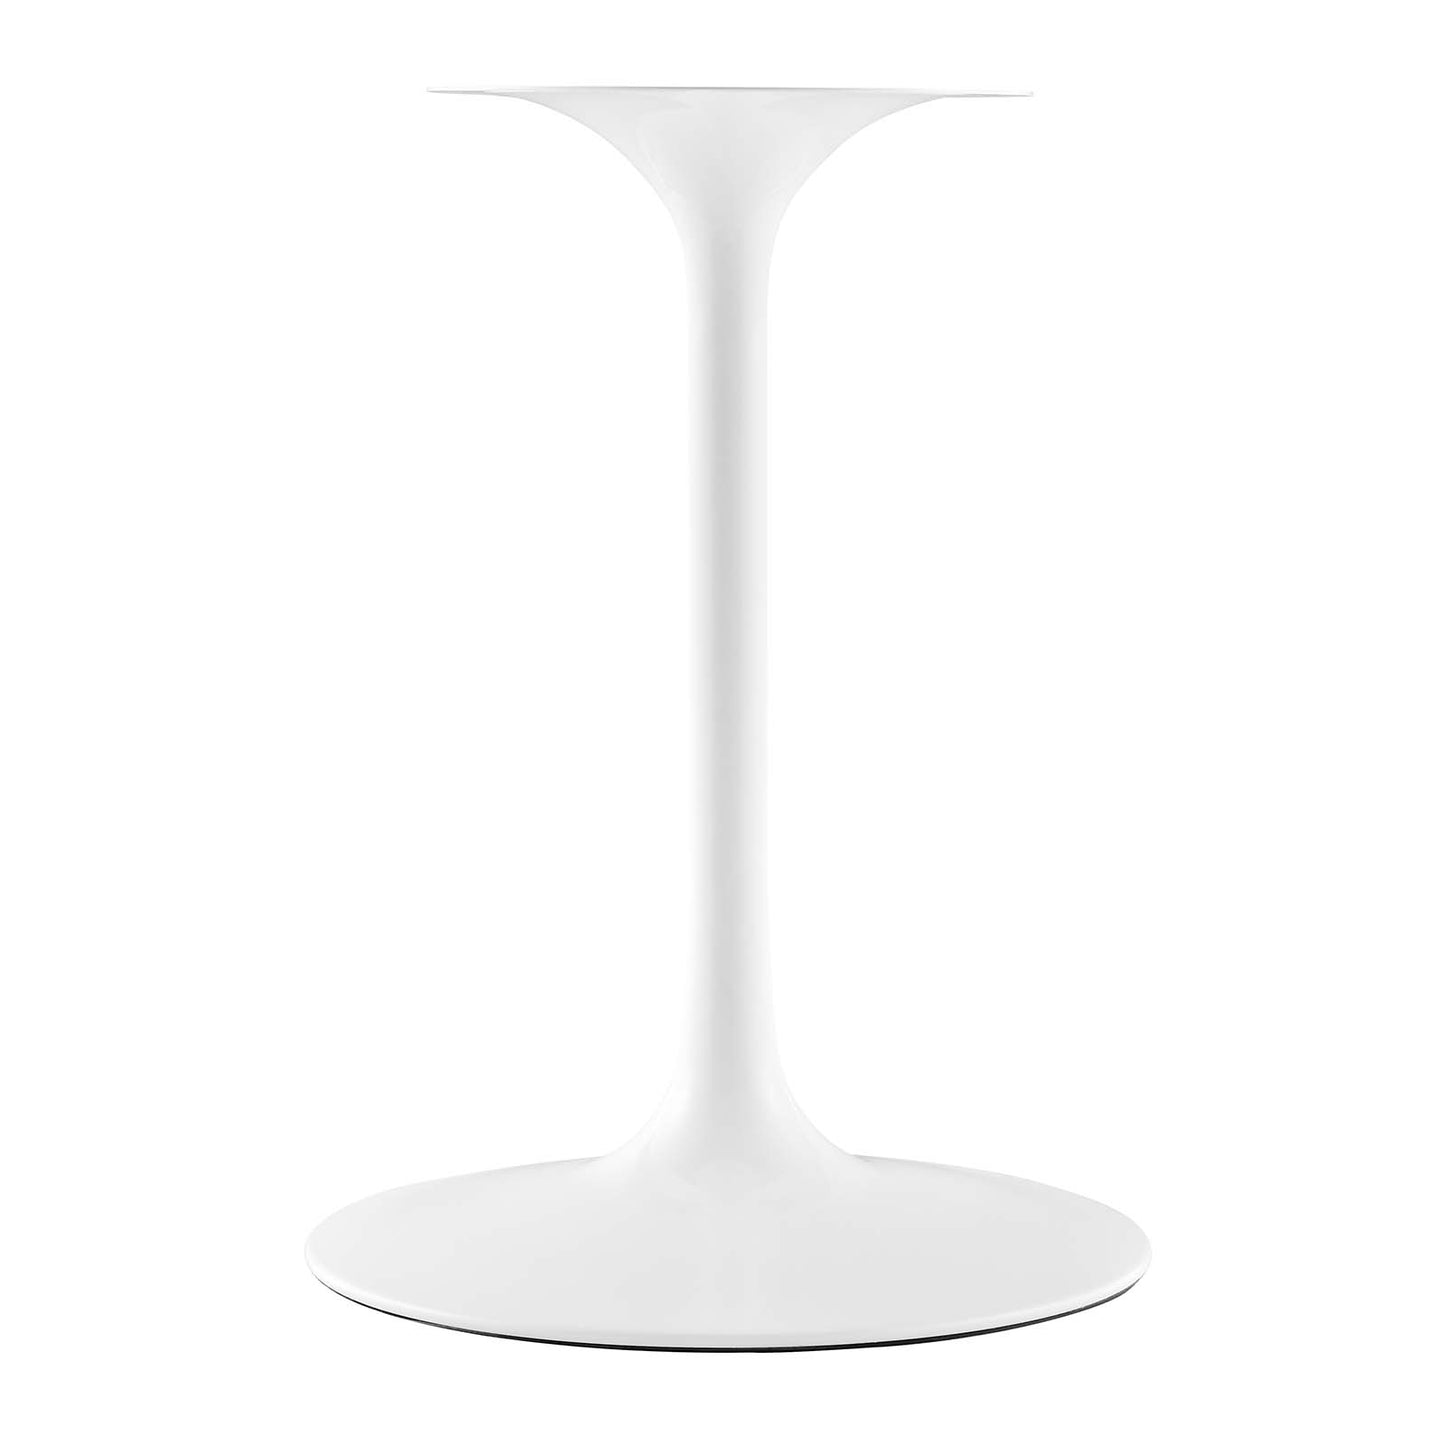 Modway Lippa 48" Oval Wood Top Dining Table in White - EEI-2017